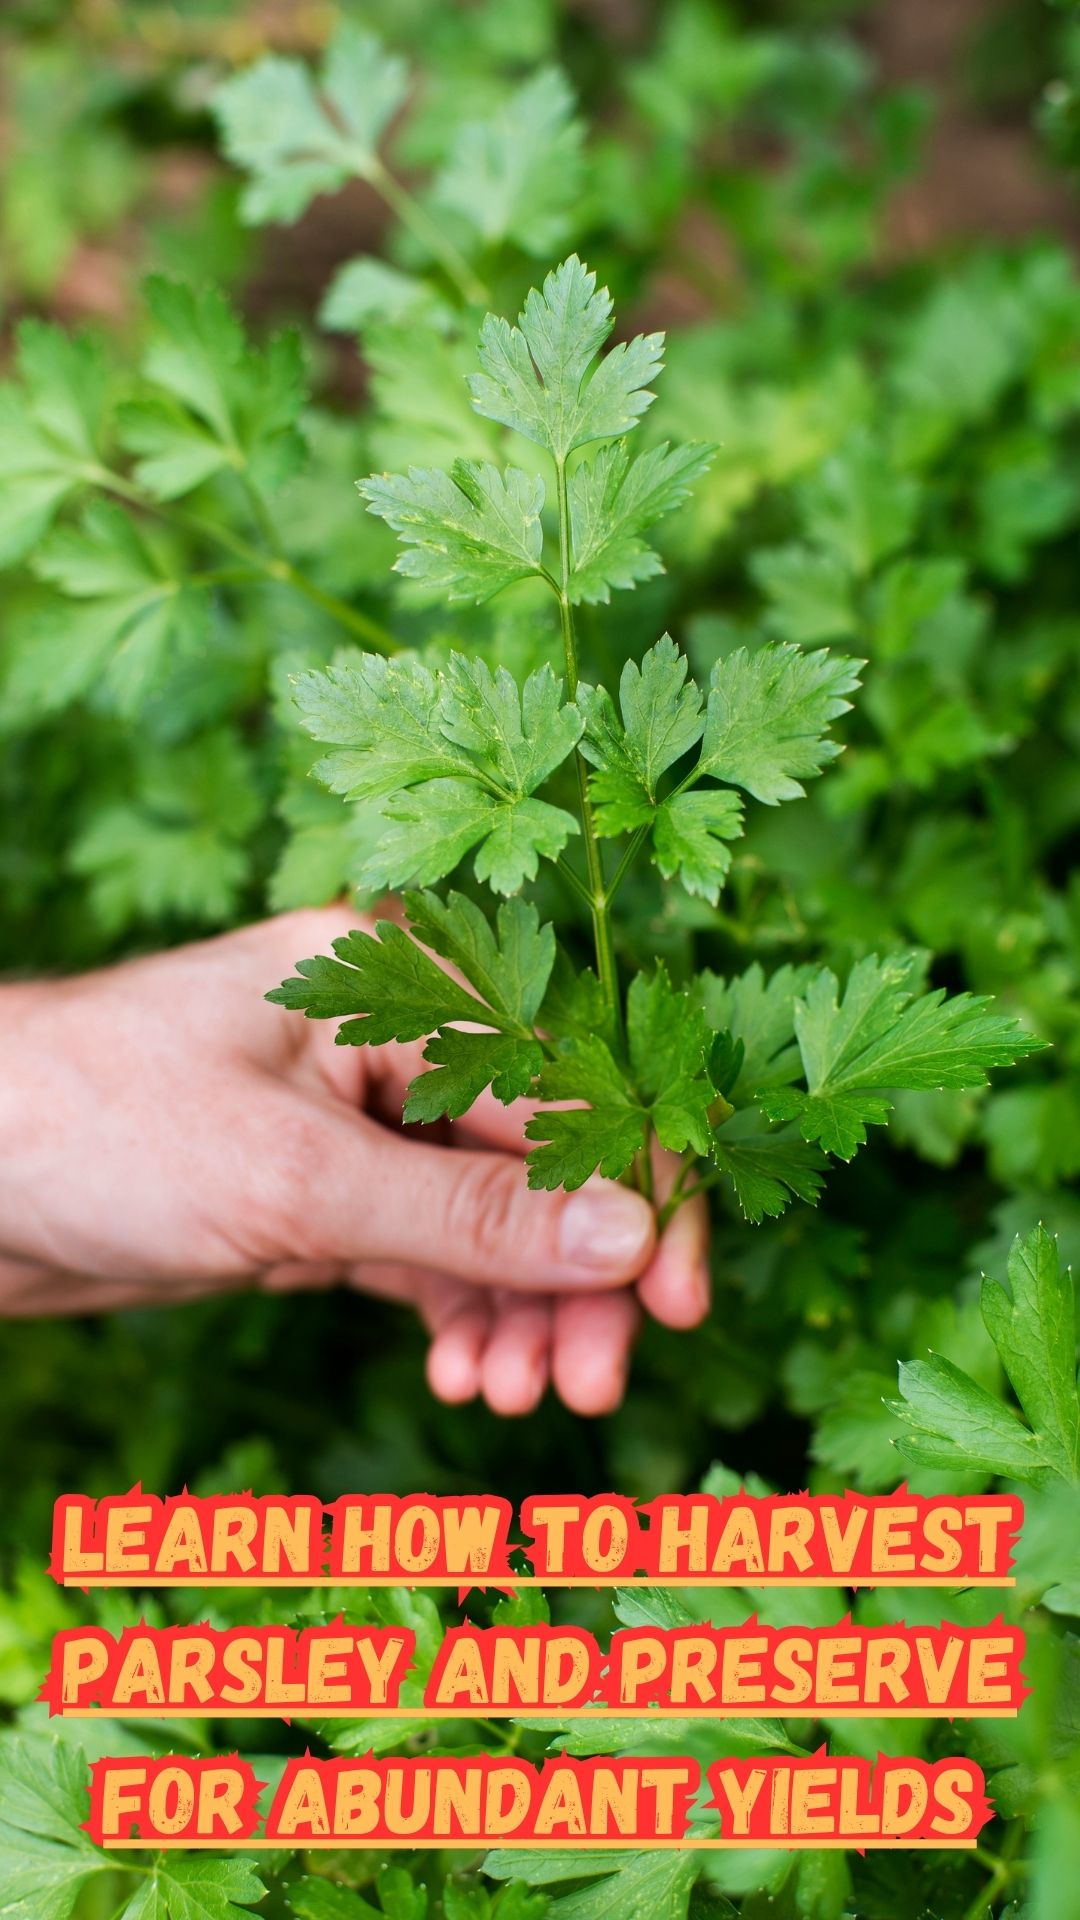 Harvesting parsley correctly is essential for an abundant supply all season long. Remember to always take whole branches from the bottom and outside the plant, leaving the top center foliage untouched. This method will encourage healthy growth and continuous production. Storing fresh parsley in your fridge is easy with the use of a glass or jar of water and a bag. And if you have an abundant harvest, don't be afraid to dry or freeze some for later use.